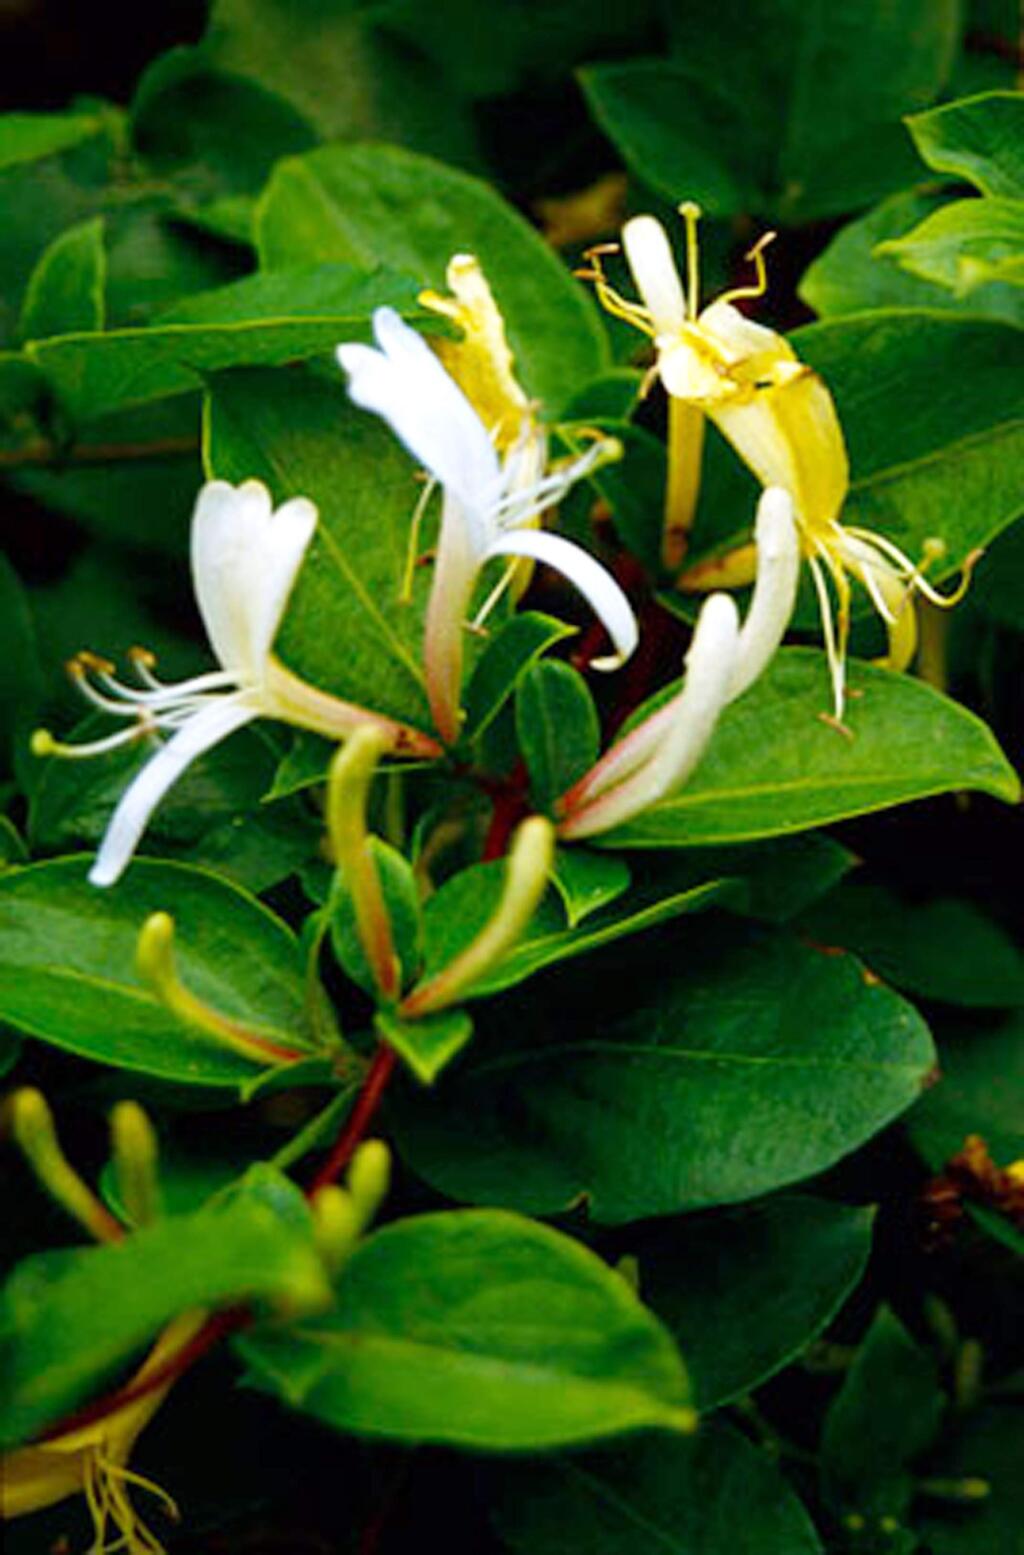 Japanese honeysuckle smells great, but also can be invasive with rapid rooting.